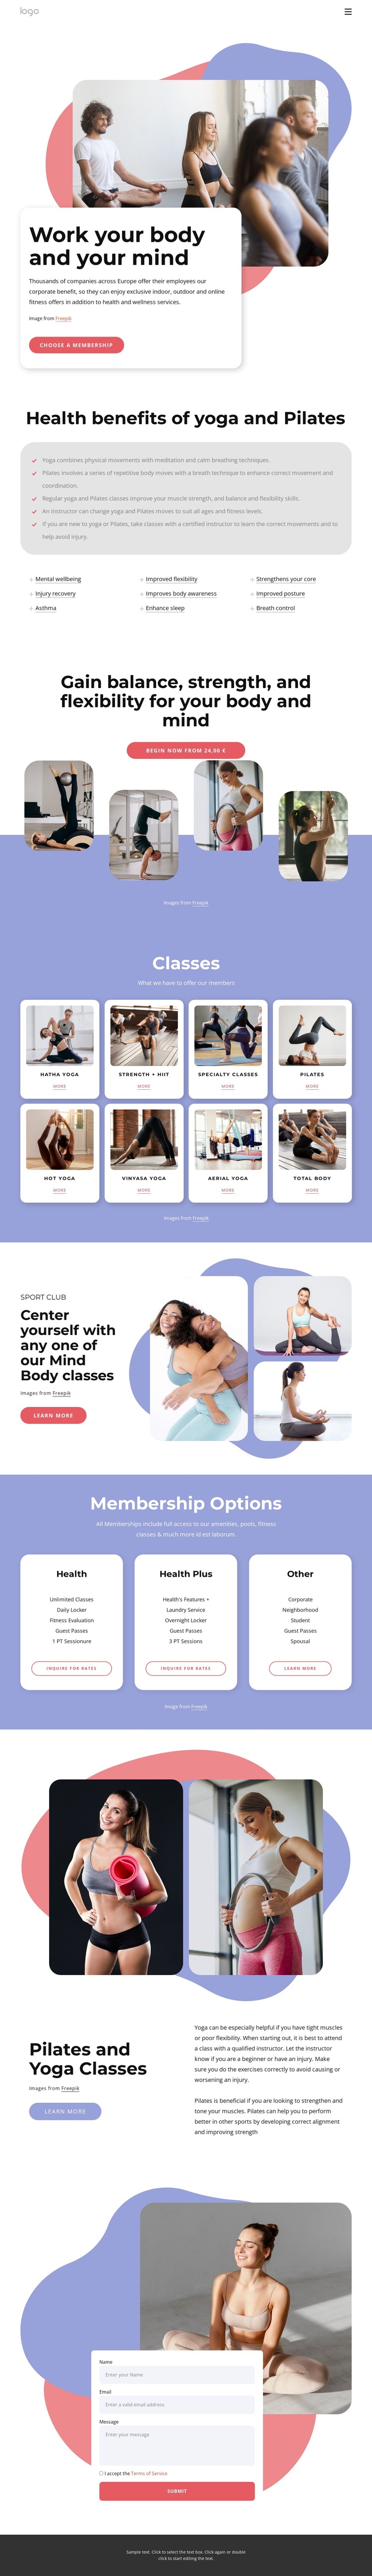 Pilates and yoga classes HTML5 Template